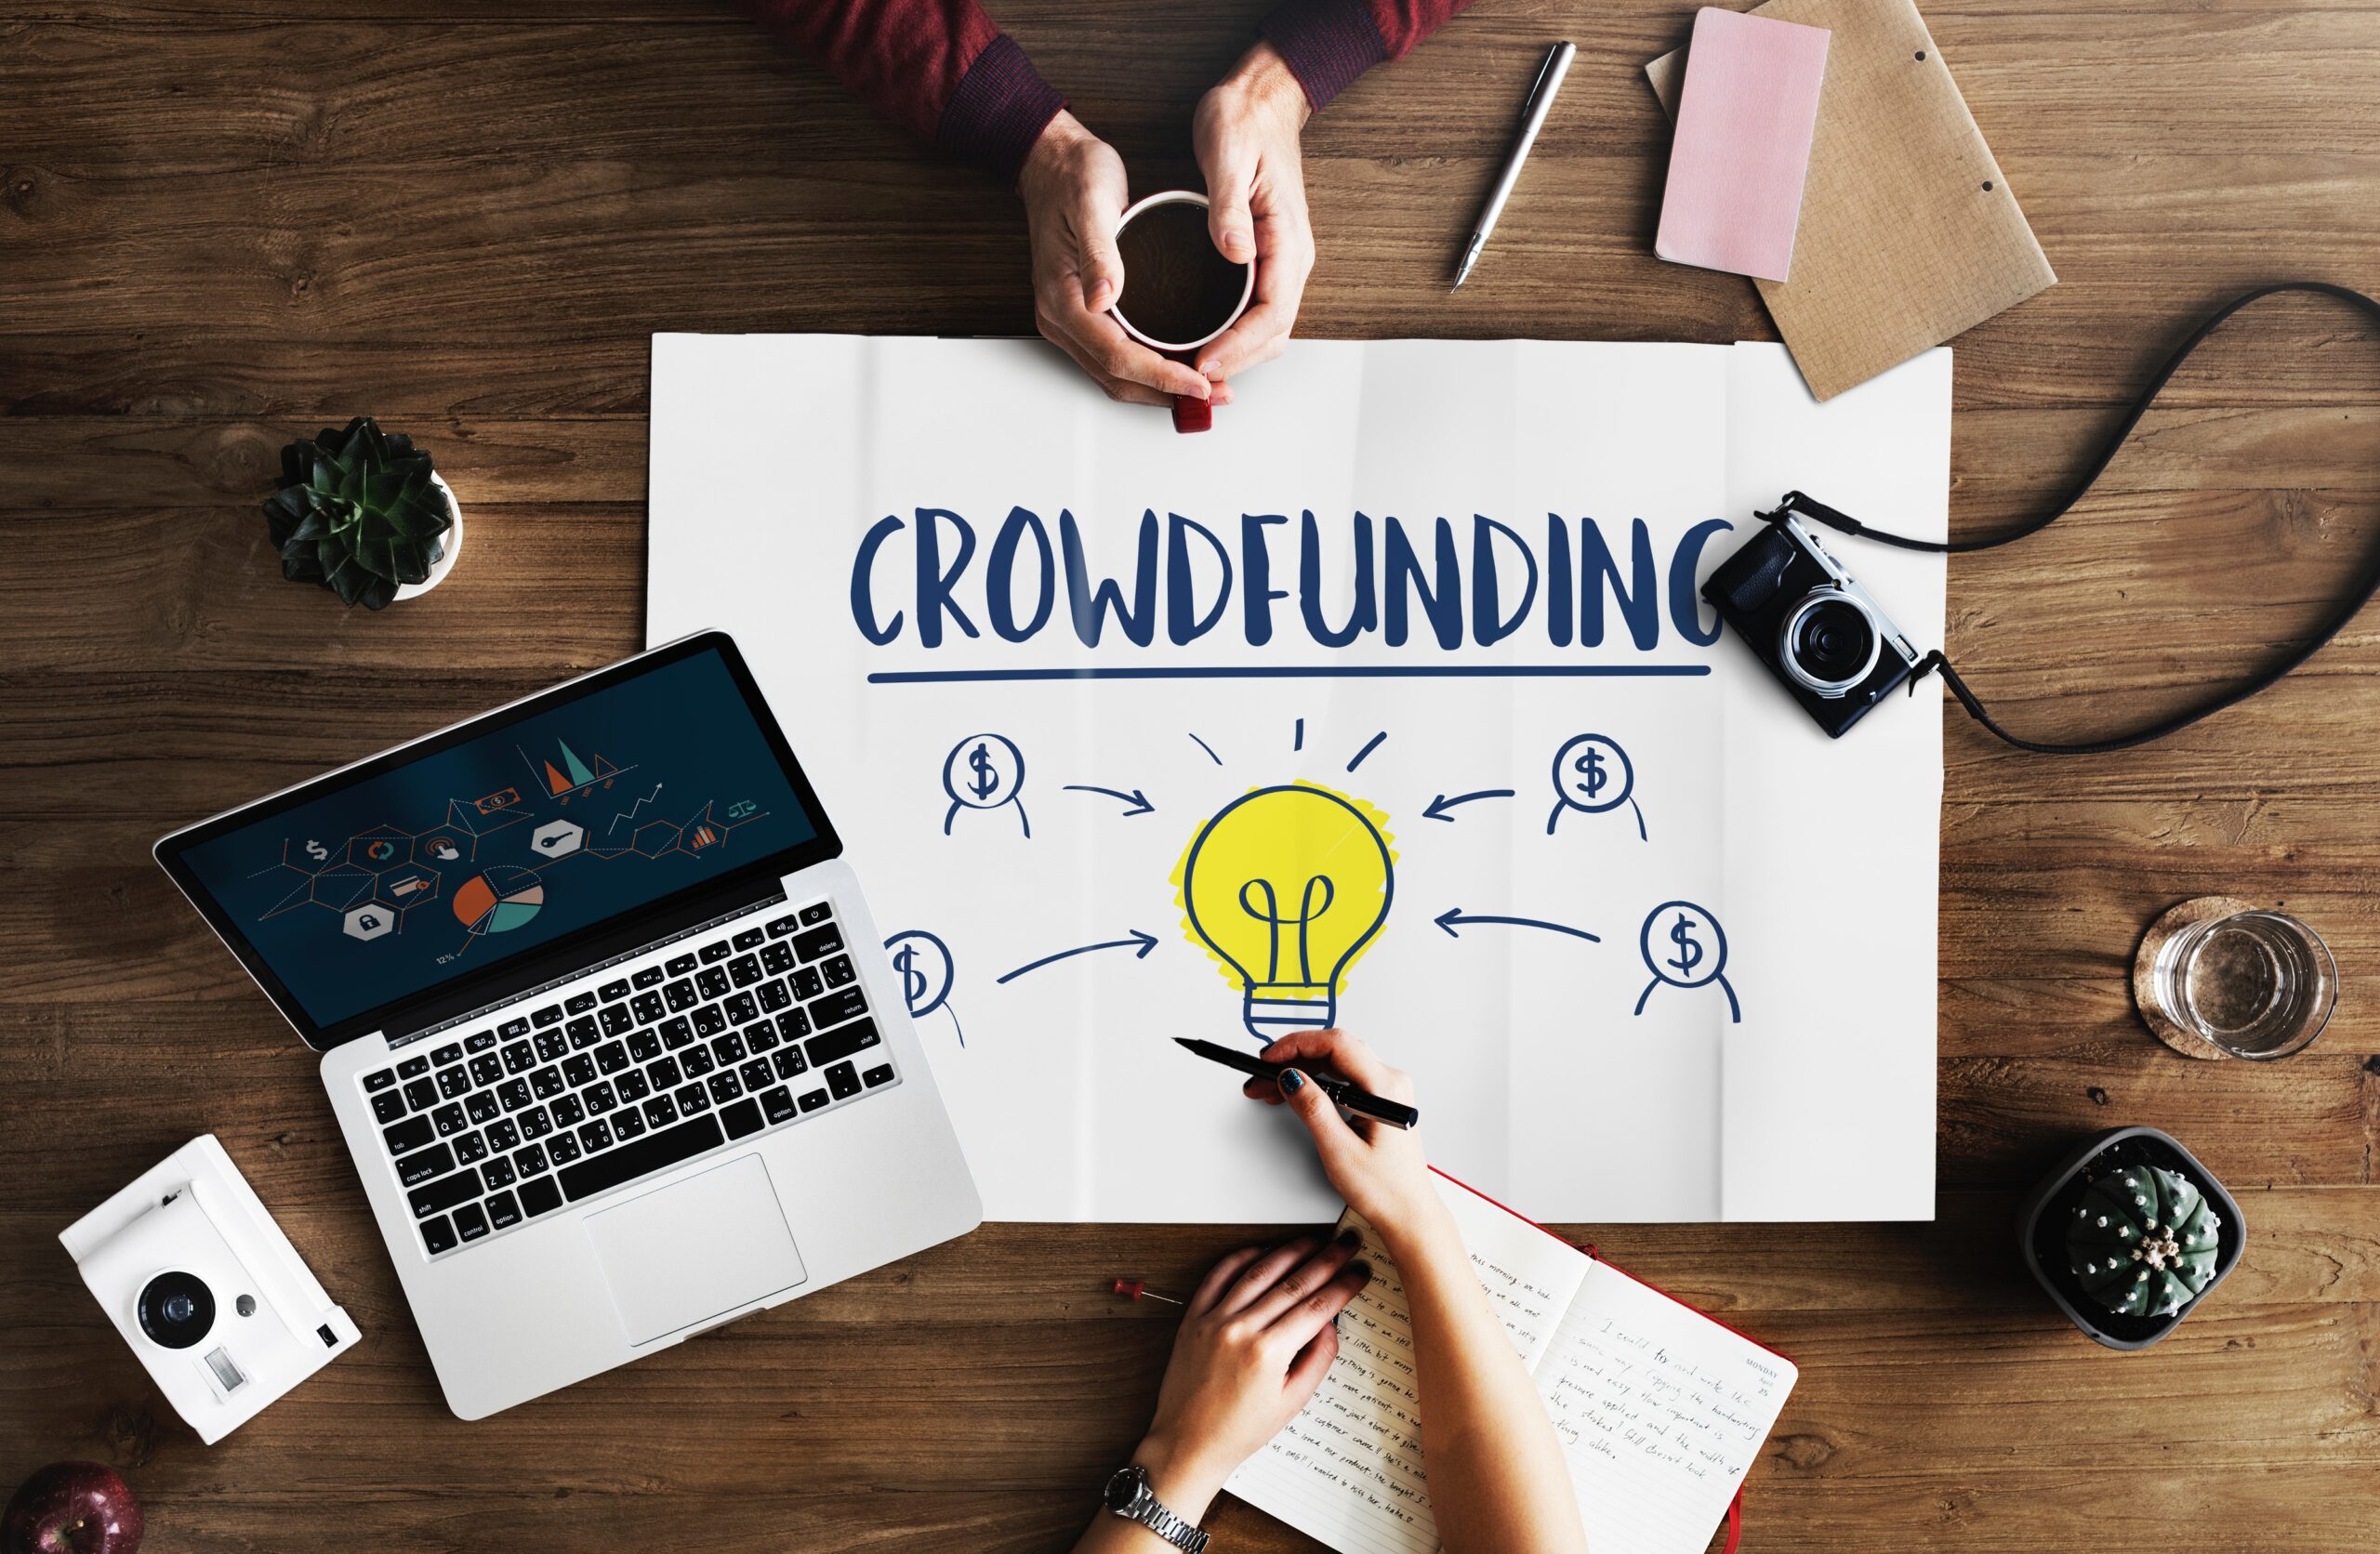  Crowdfunding is the technique of obtaining money from a big group of individuals in tiny increments to support a project or commercial endeavour. While this technique has brought over $65 billion into the economy, data shows that only around a quarter of all crowdfunding initiatives are successful. As a consequence, many entrepreneurs looking for capital are turning to specialists for assistance. A crowdfunding consulting service provides assistance to companies in the creation, management, and promotion of their crowdfunding campaign.